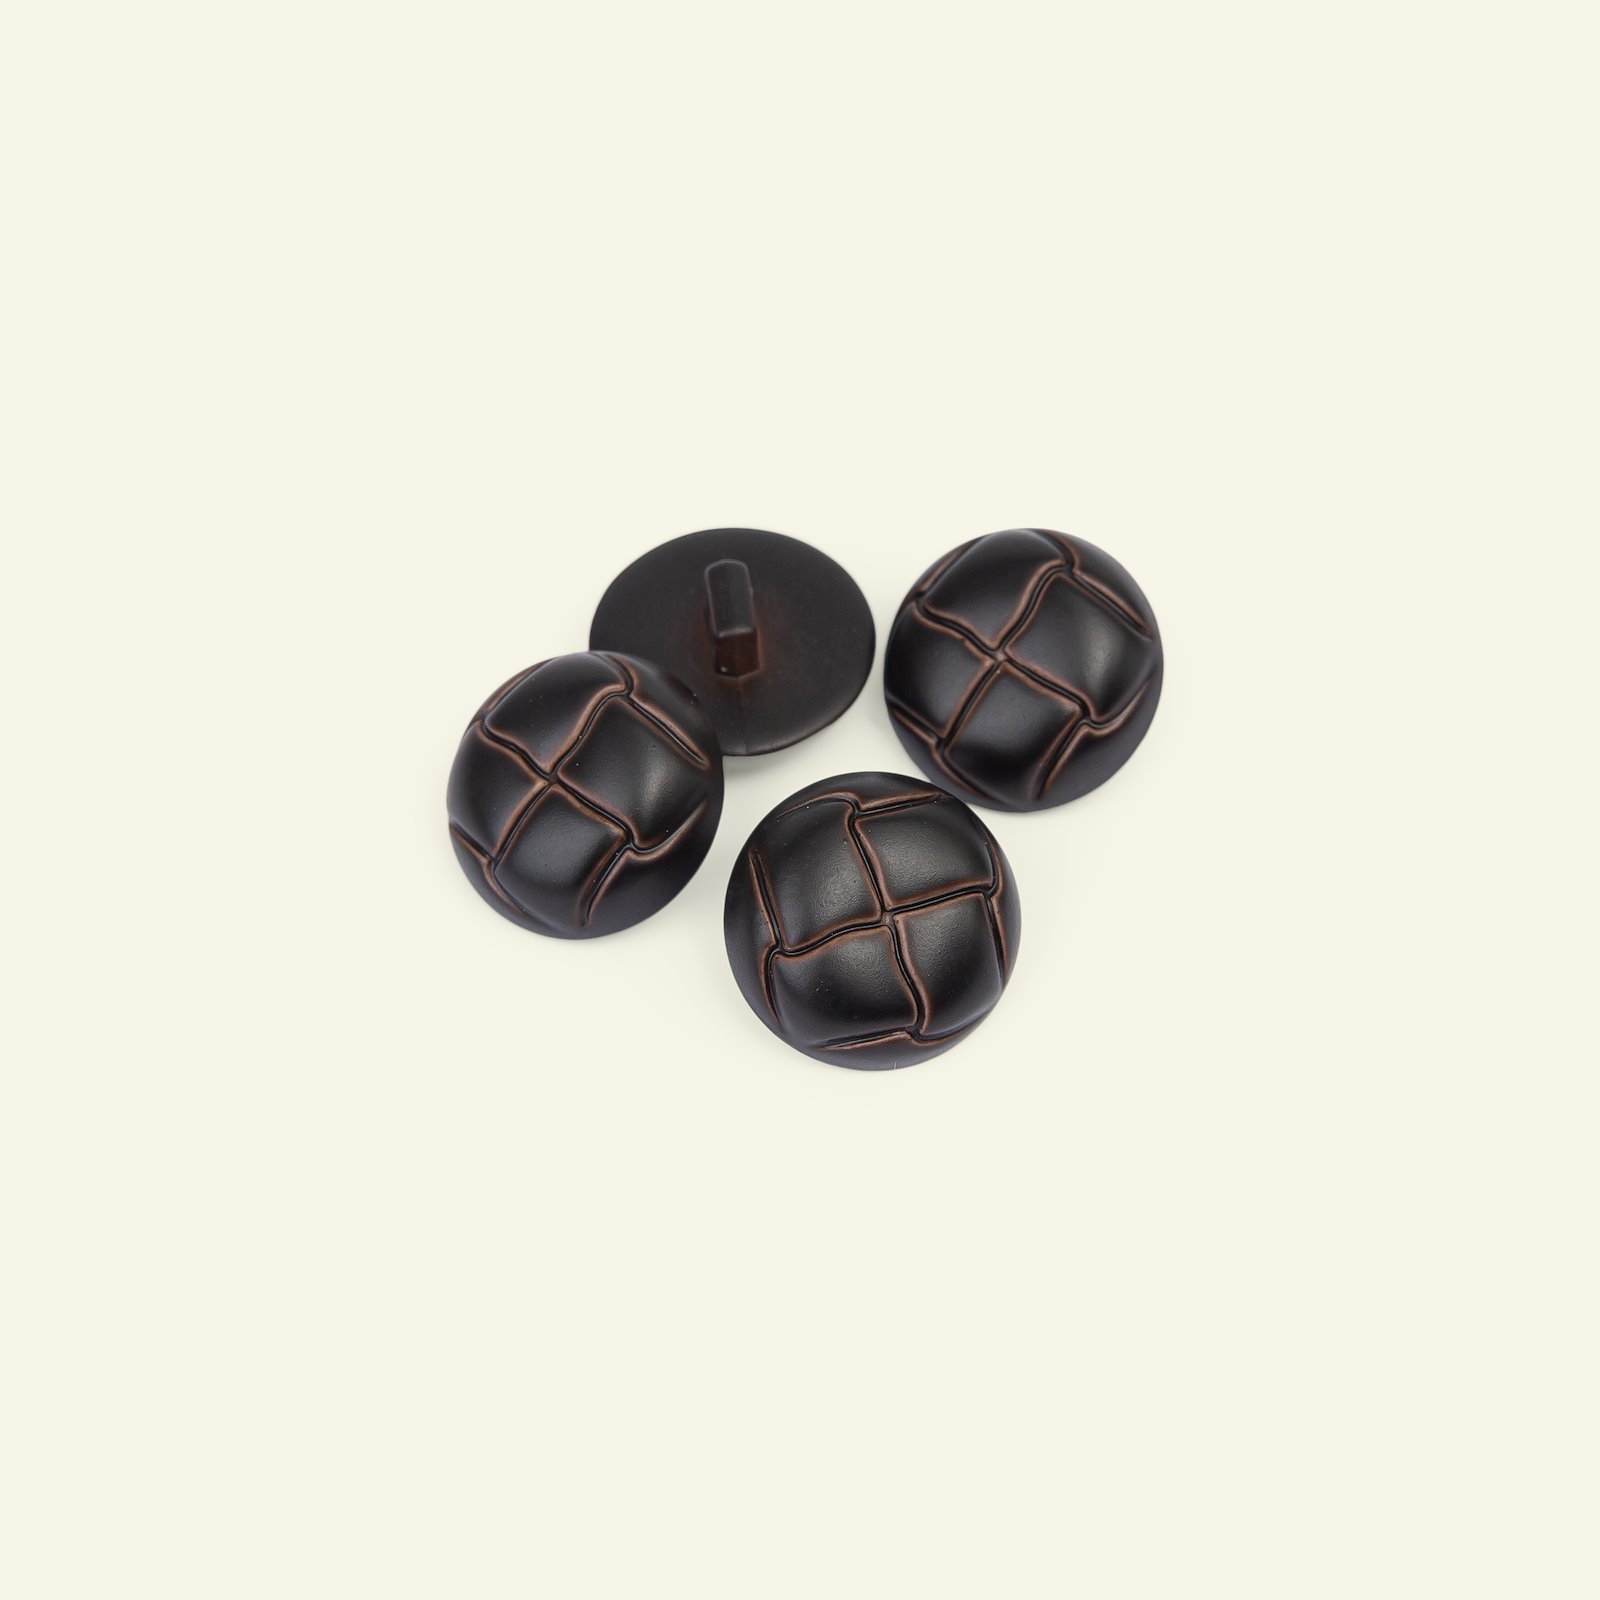 Shank button leatherlook 20mm brown 4pcs 33524_pack